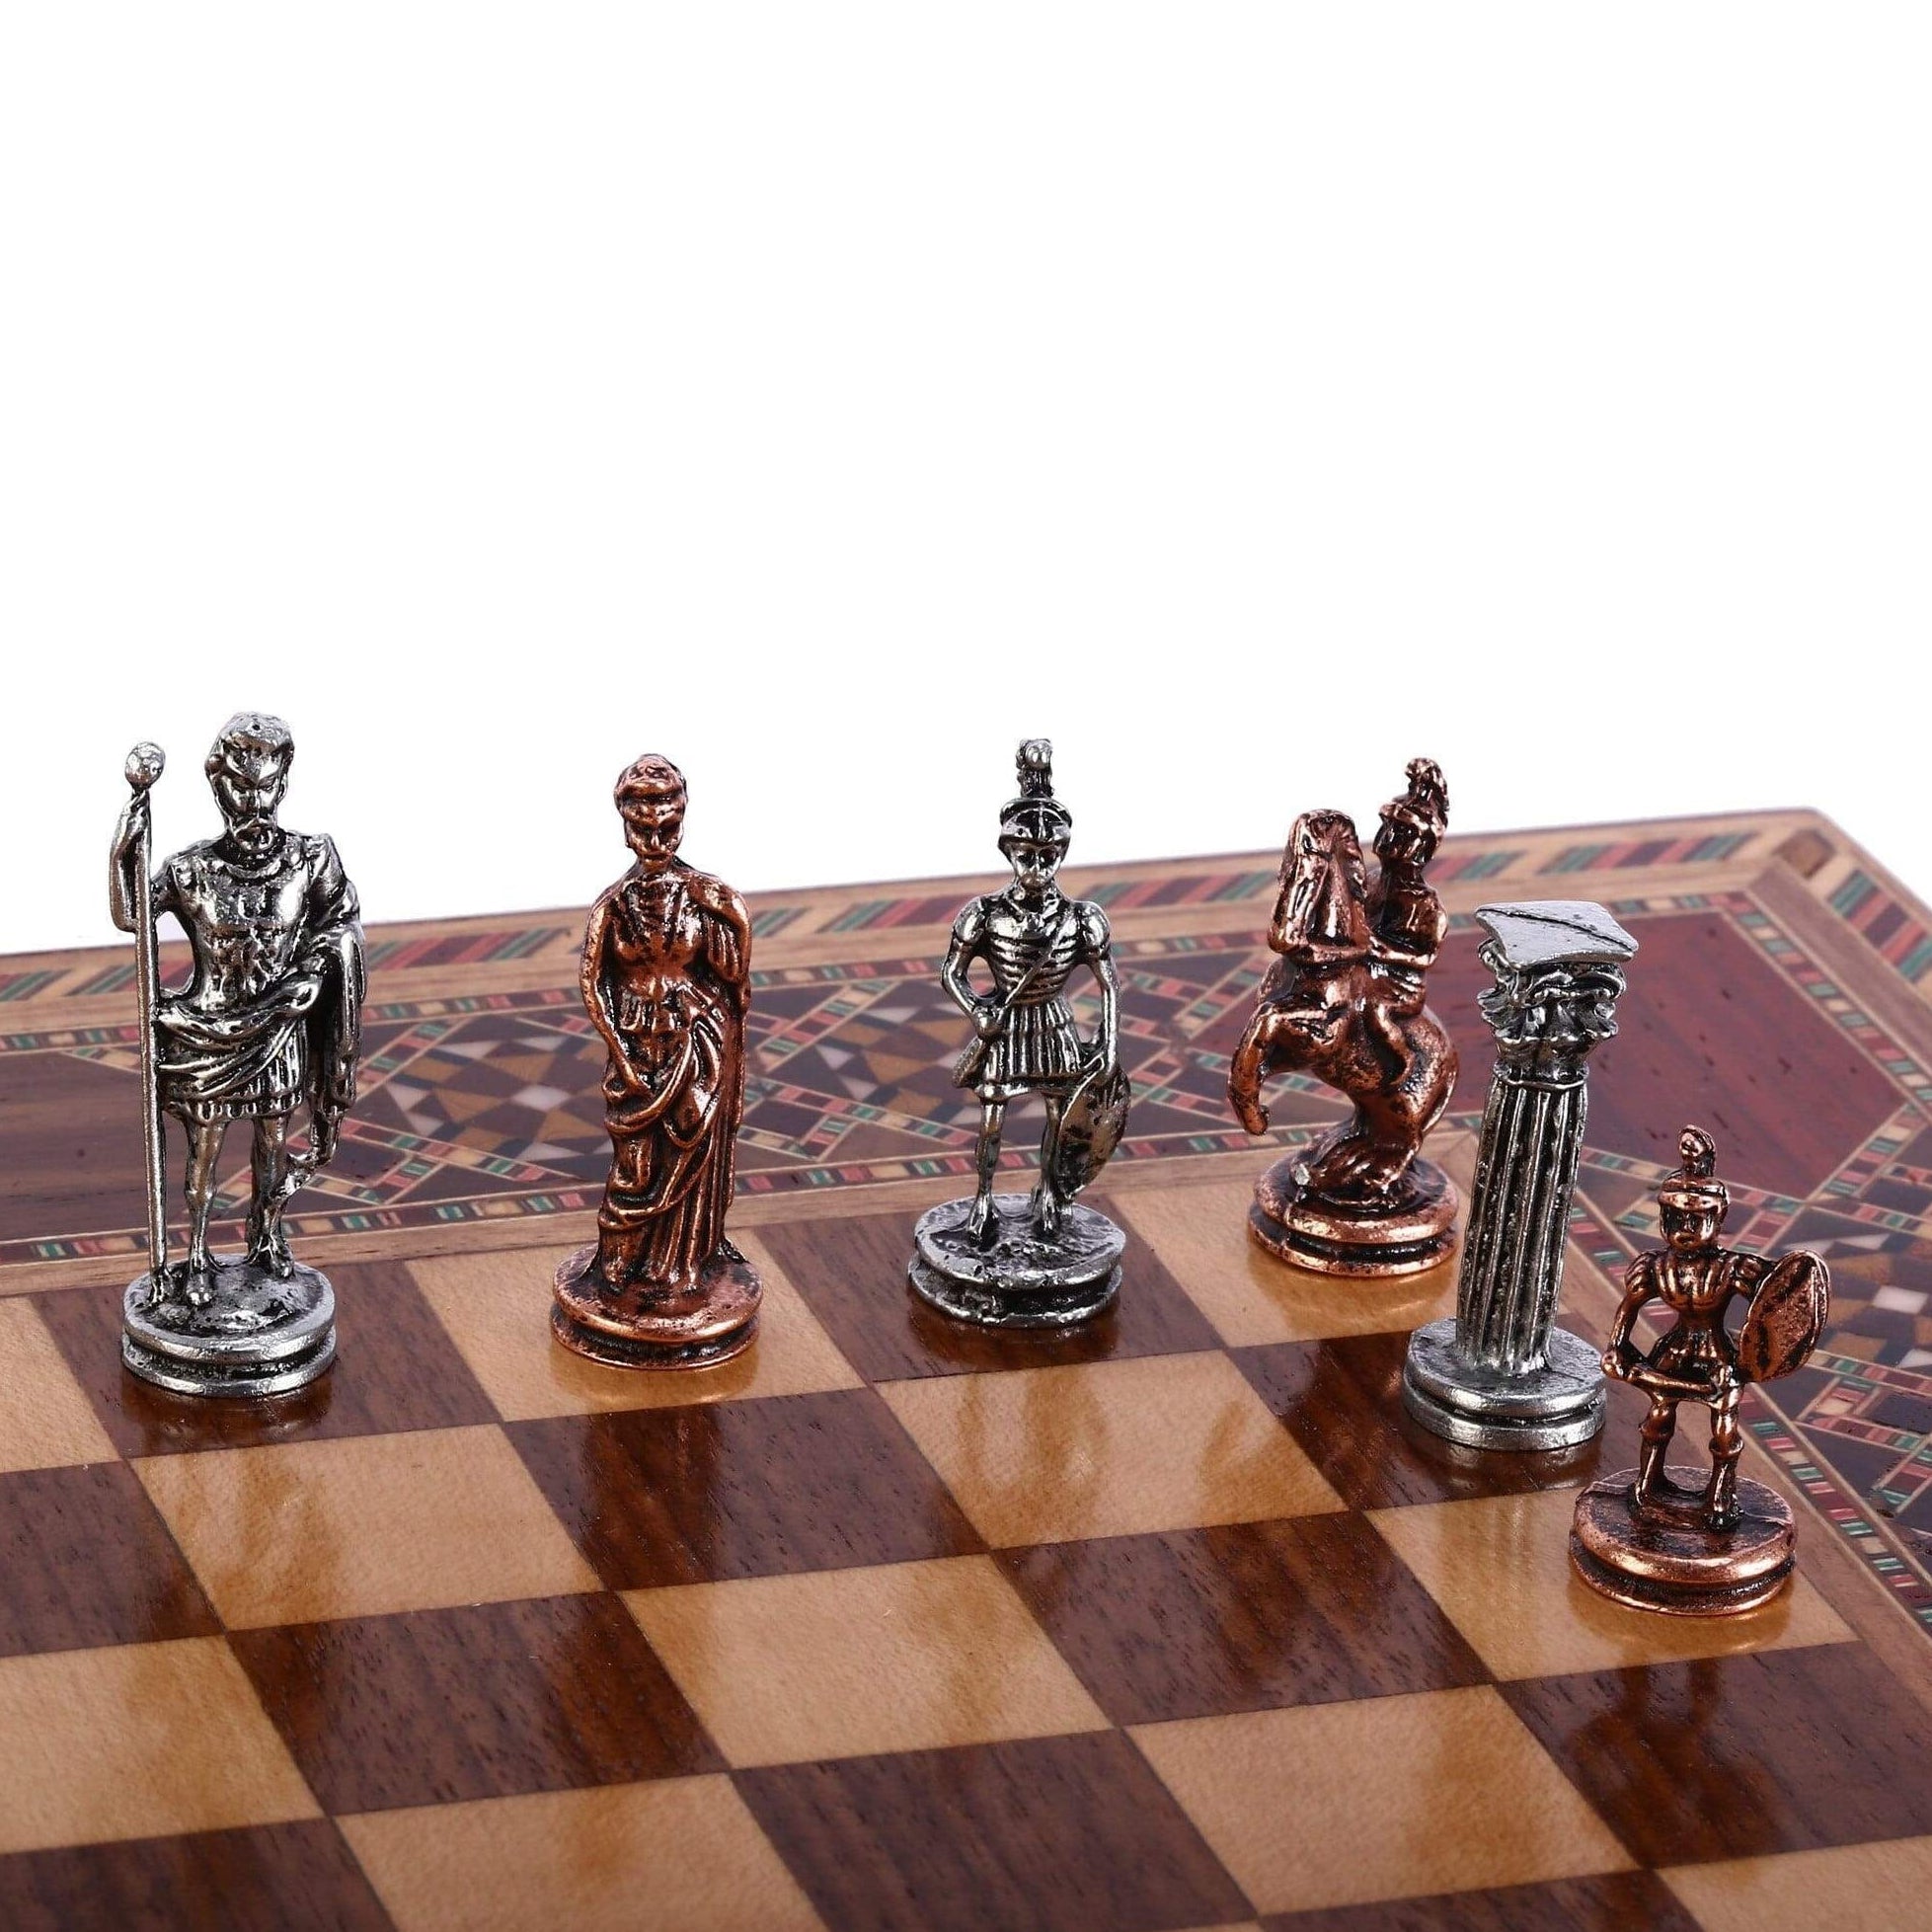 Antique Copper Roman Chess Pieces With Natural Wood Chess Board | Storage In Board | whatagift.com.au.